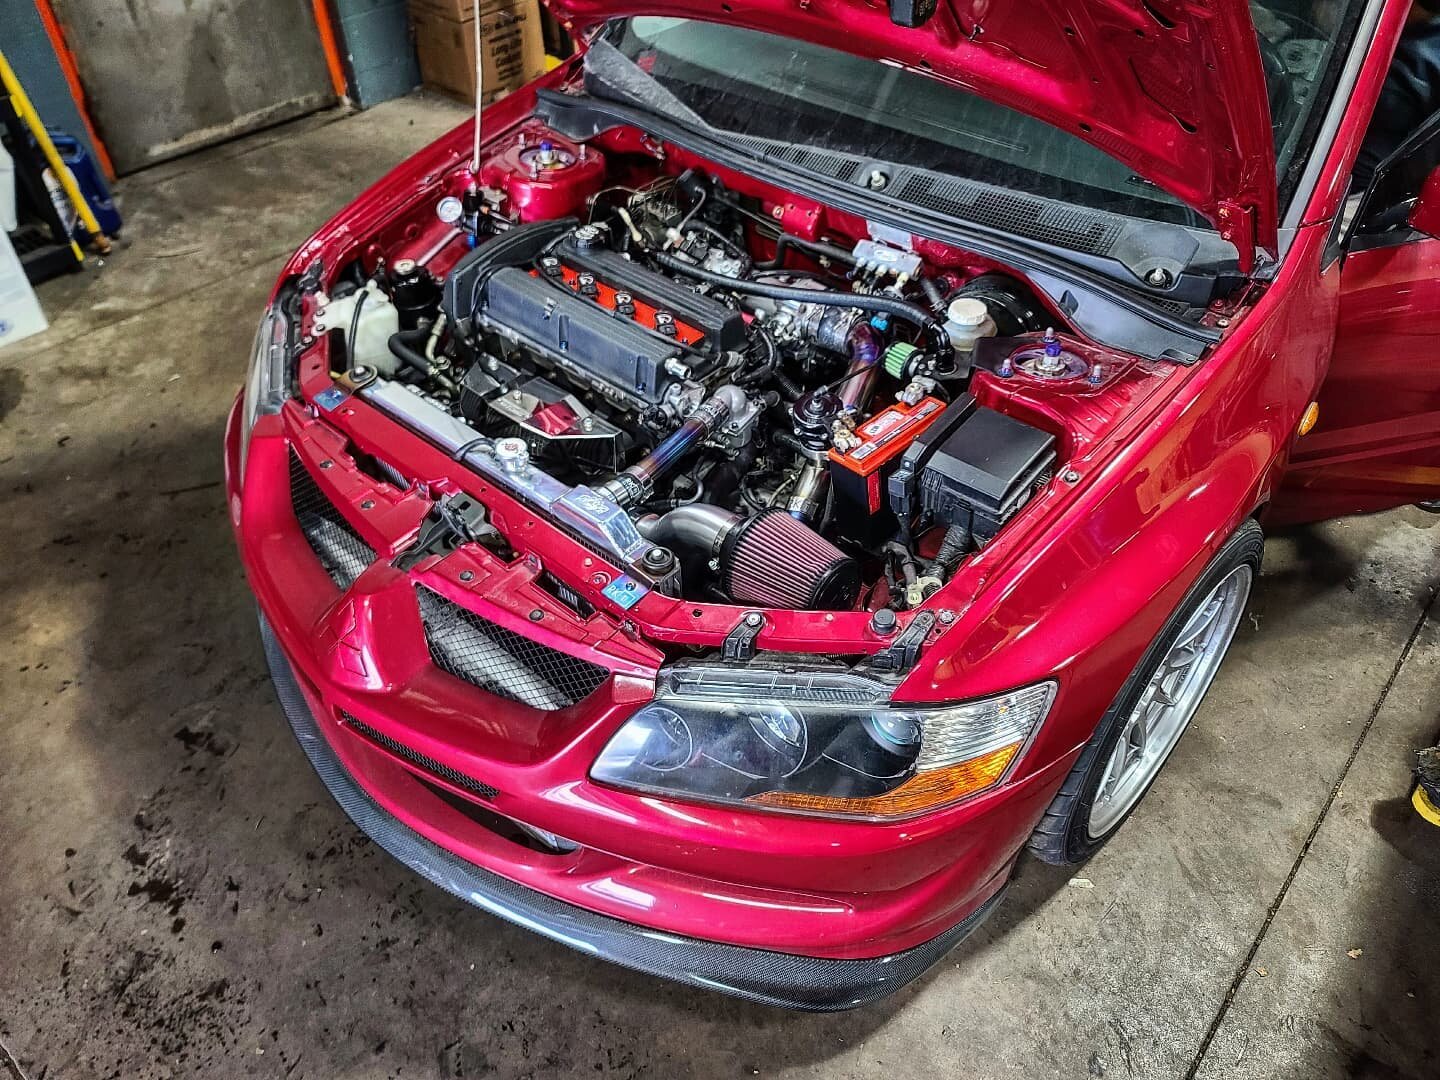 Fresh 4G63 wrapped up for this gorgeous Evo 8 paired with plenty of clean parts. Engine bay aesthetic on point! She'll be available through @dialedindealer soon after she gets a dyno tune.
.
.
.
#mitsubishi #evolution #engine #bay #aesthetic #4g63 #E